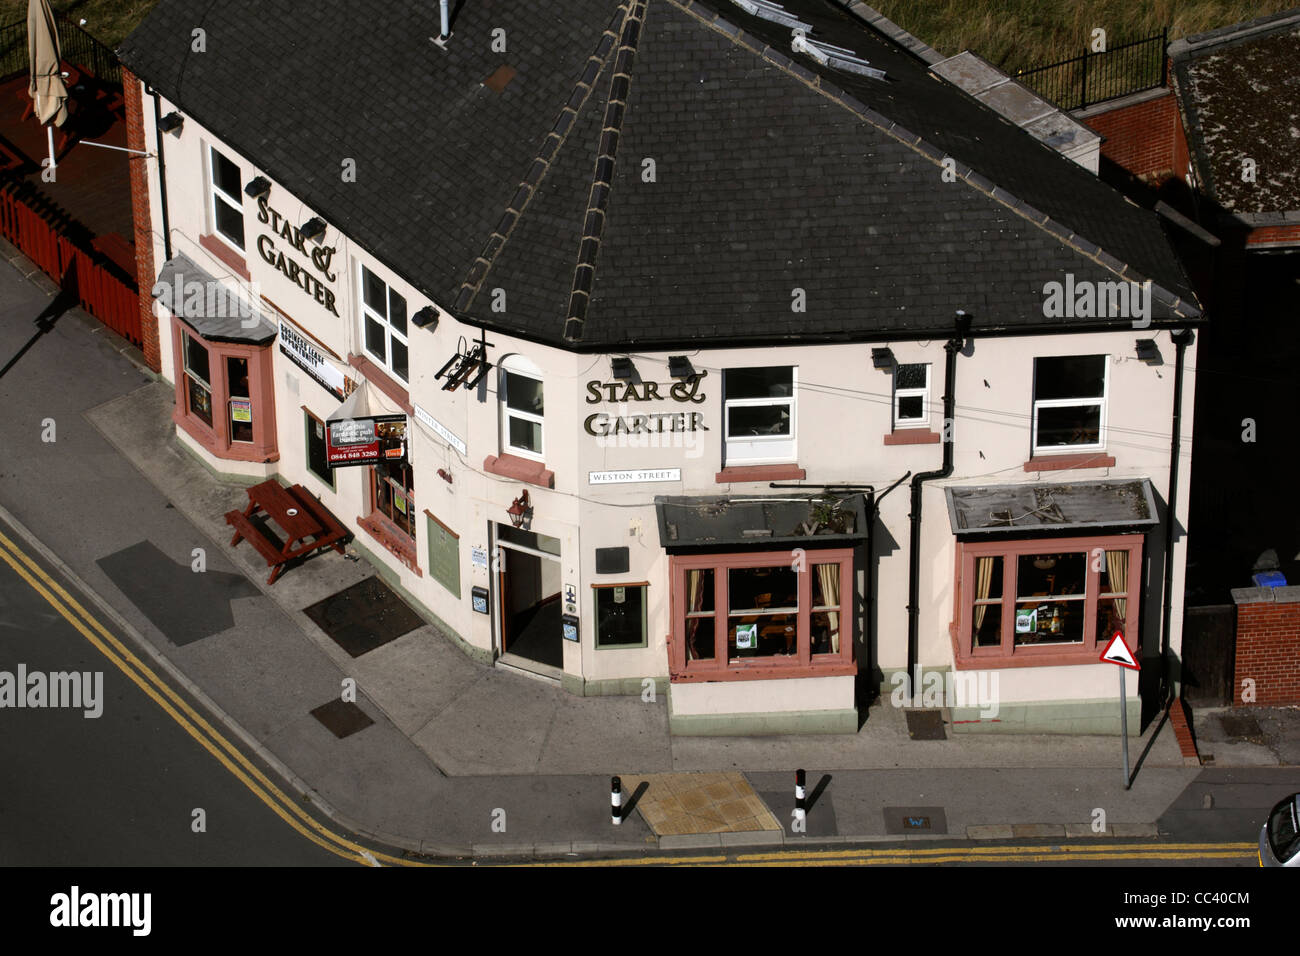 Star and Garter public house in  Sheffield city South Yorkshire  England Stock Photo